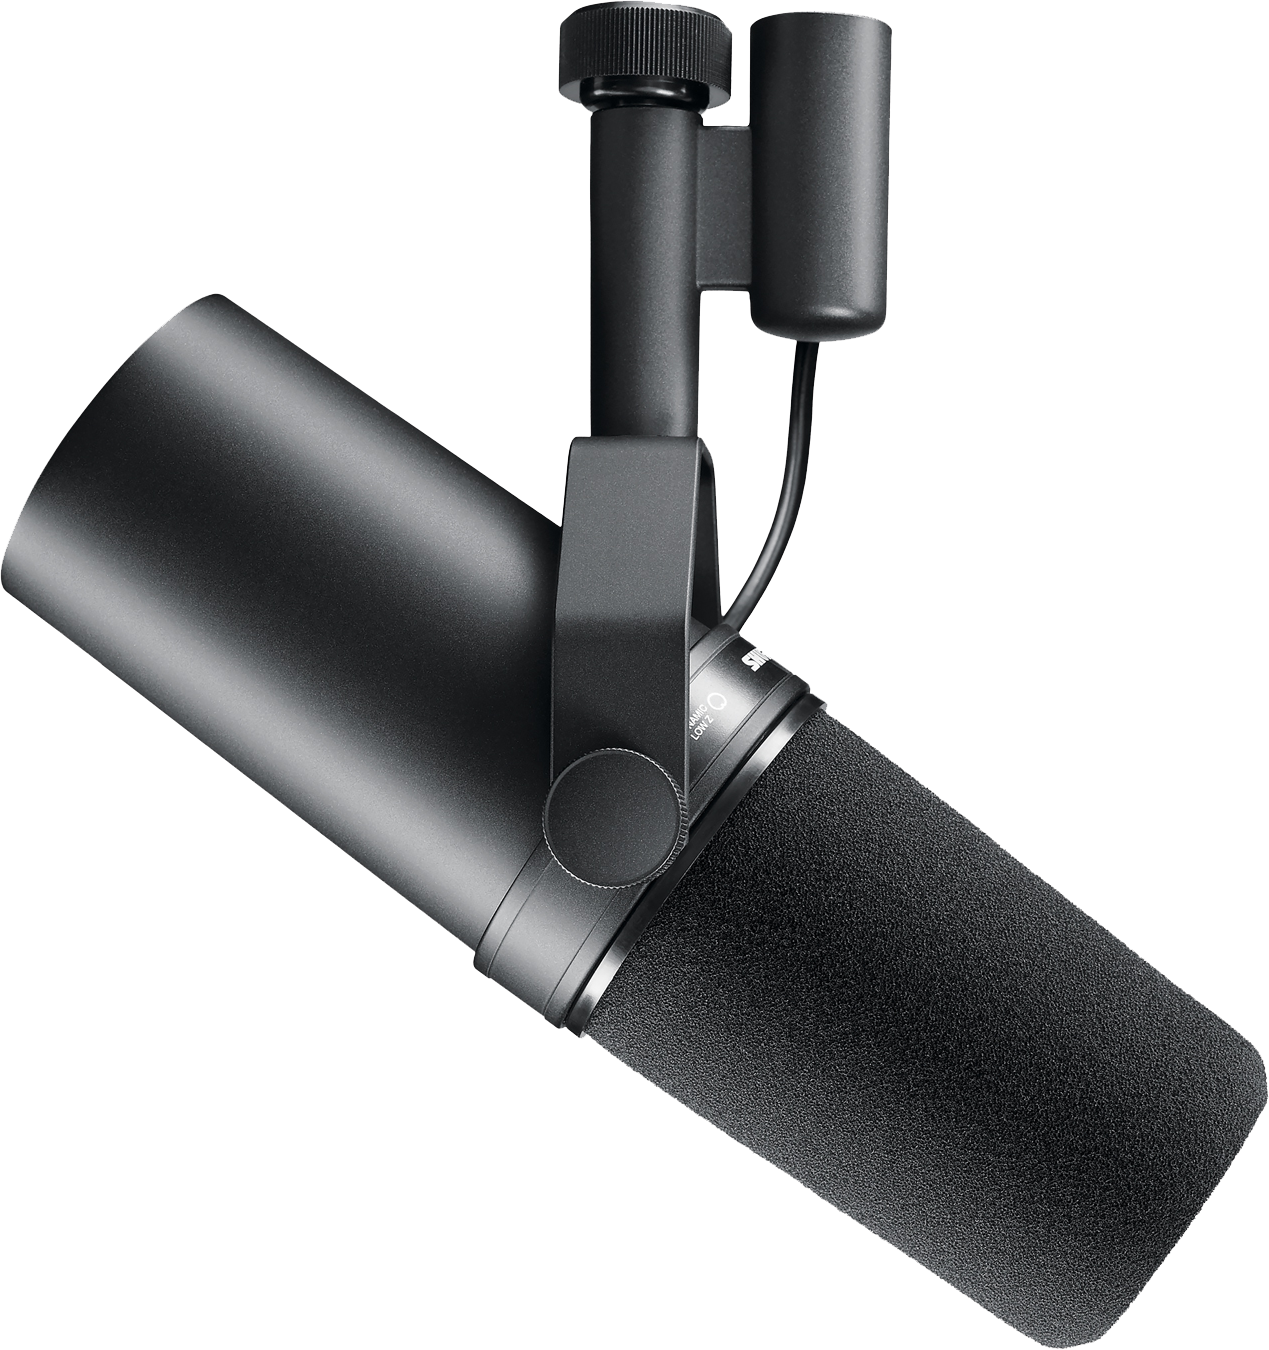 Side angle of Shure SM7B Dynamic Studio Vocal Microphone.